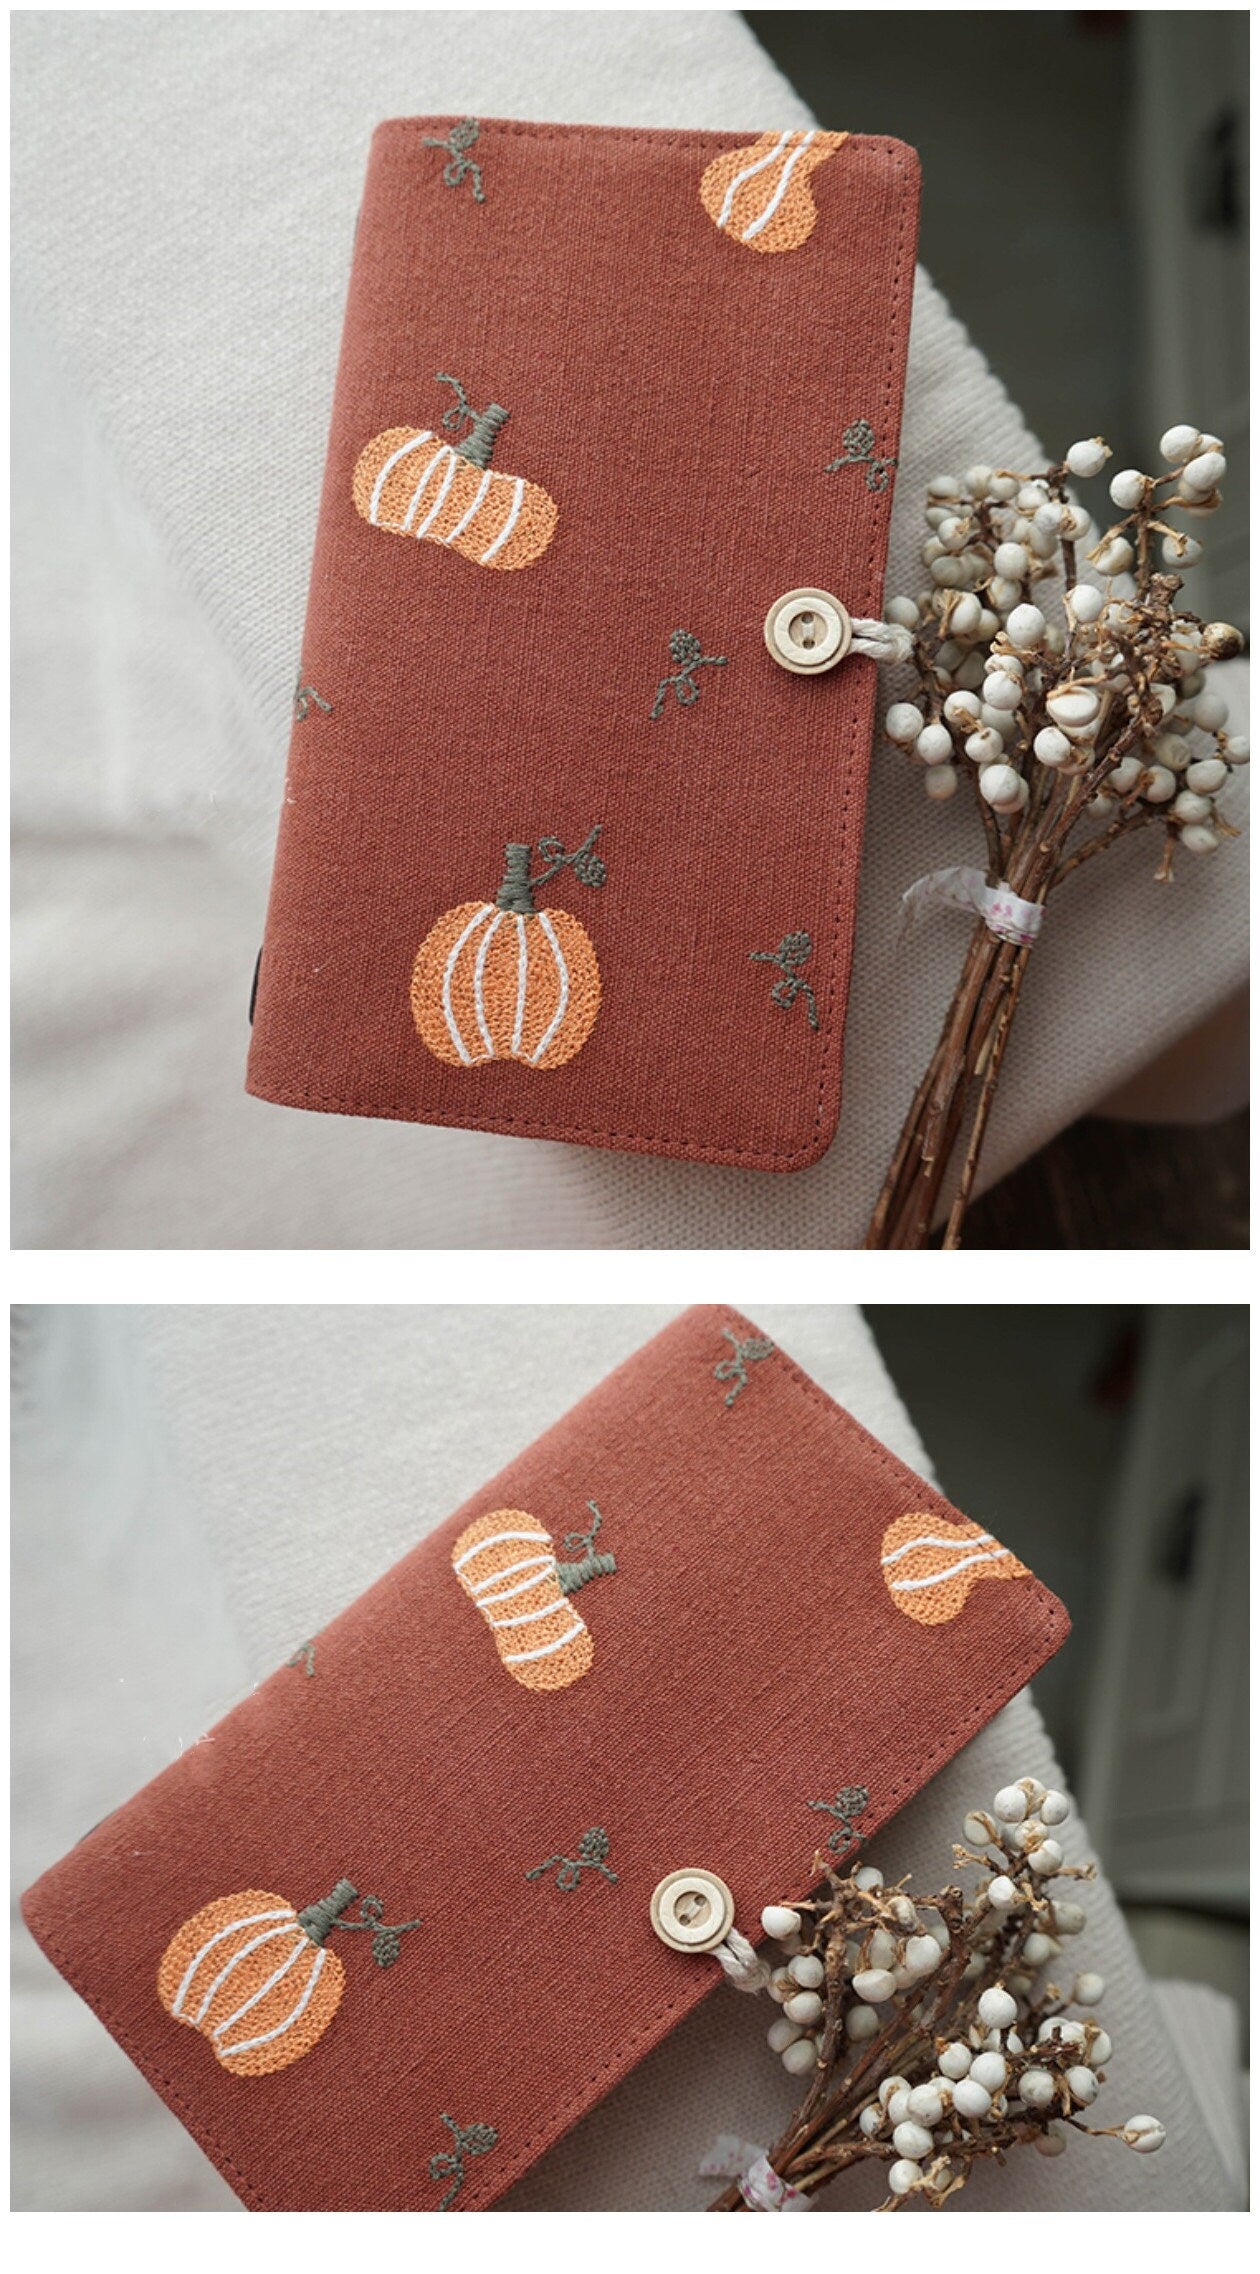 Embroidered Pumpkin Fabric TN Journal Cute Portable Notepad Lined Blank Grid Pages Retro Handmade Embroidery TN Notebook Worth Gift for her